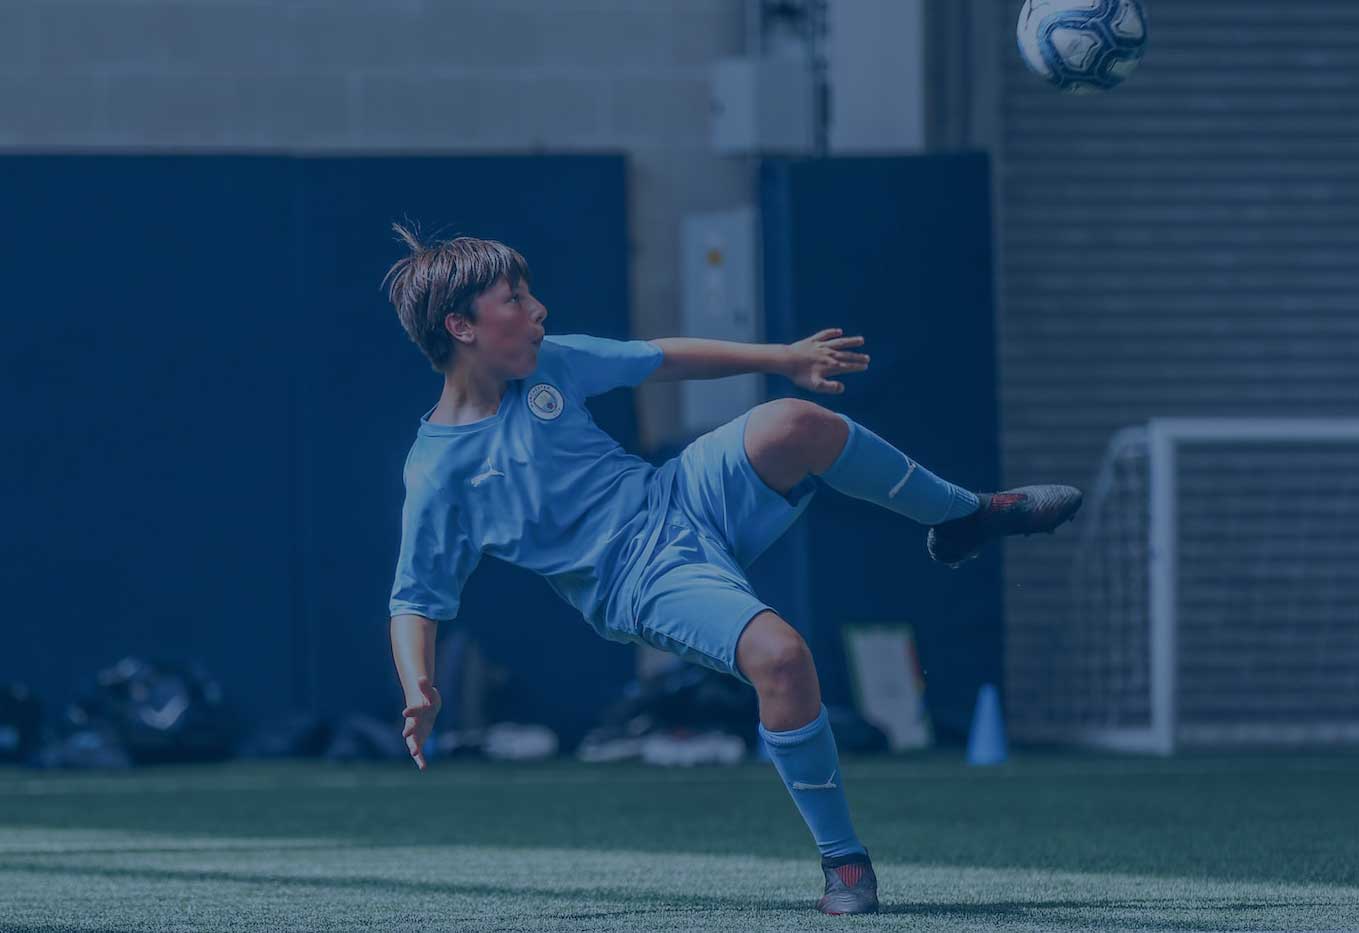 A young boy kicking a football. He has brown hair and is wearing a Manchester City Football School kit.